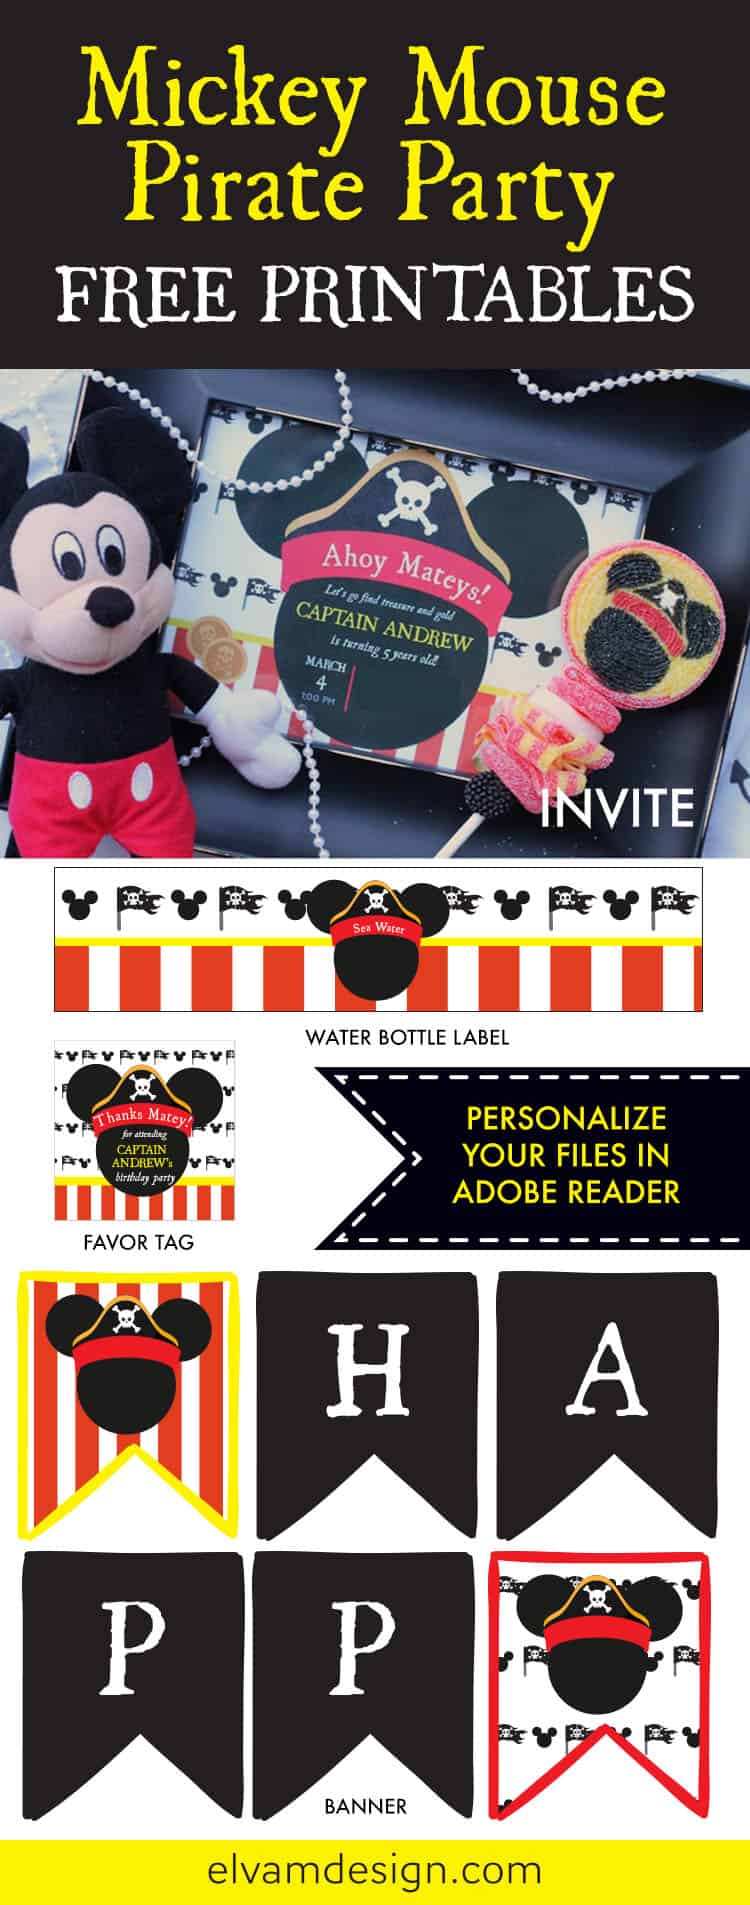 Free Mickey Mouse Pirate Party Printables from Elva M Design Studio. Download yours at elvamdesign.com.